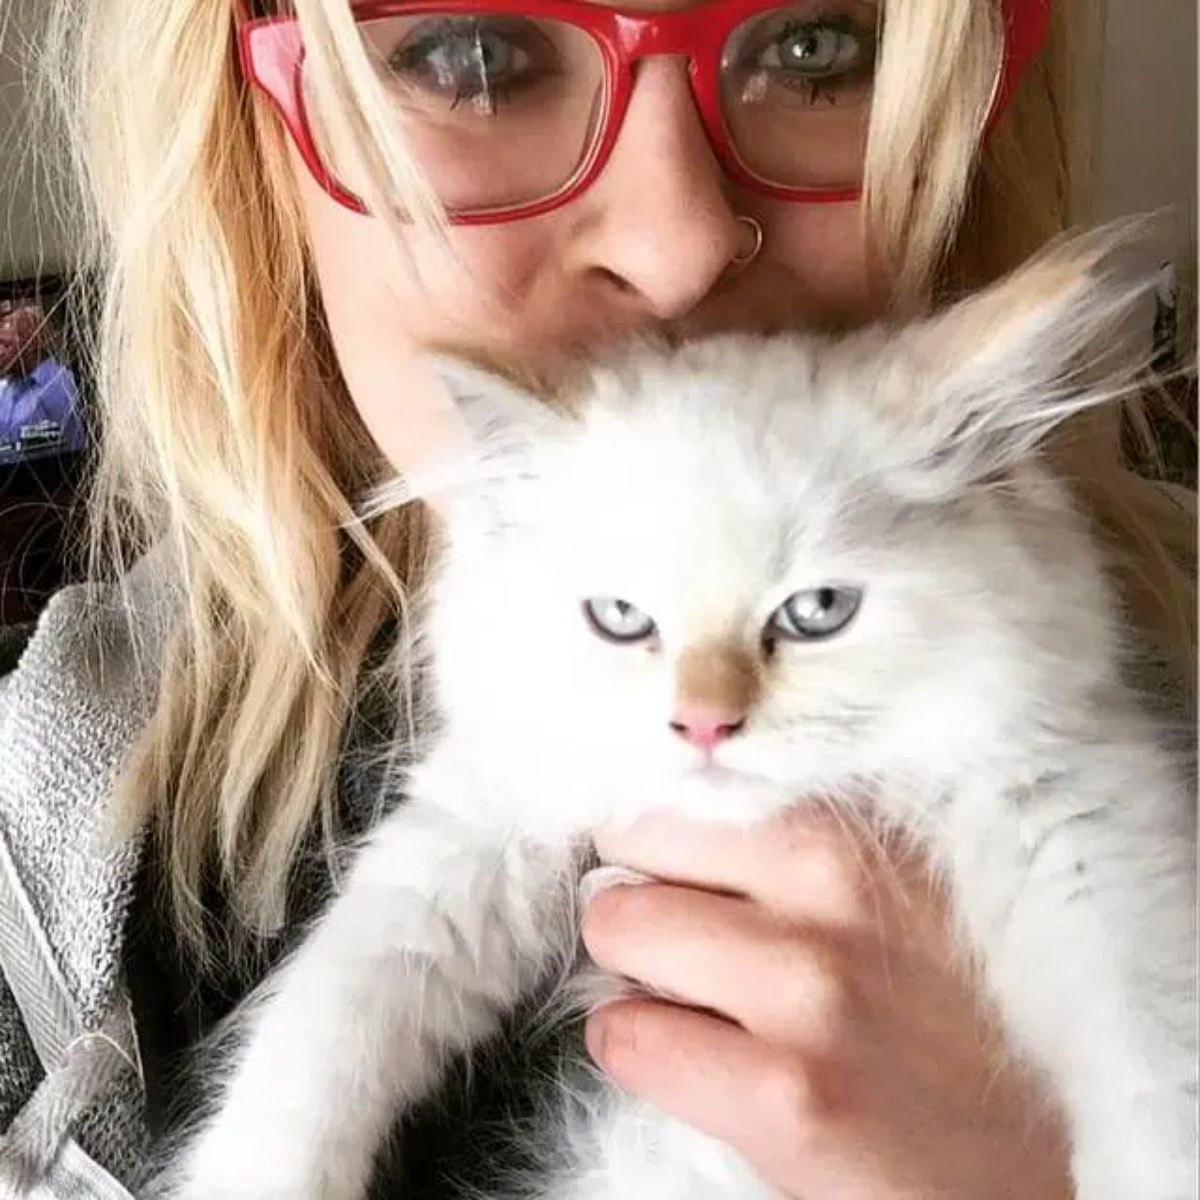 white fluffy kitten being held by a woman and looking grumpy